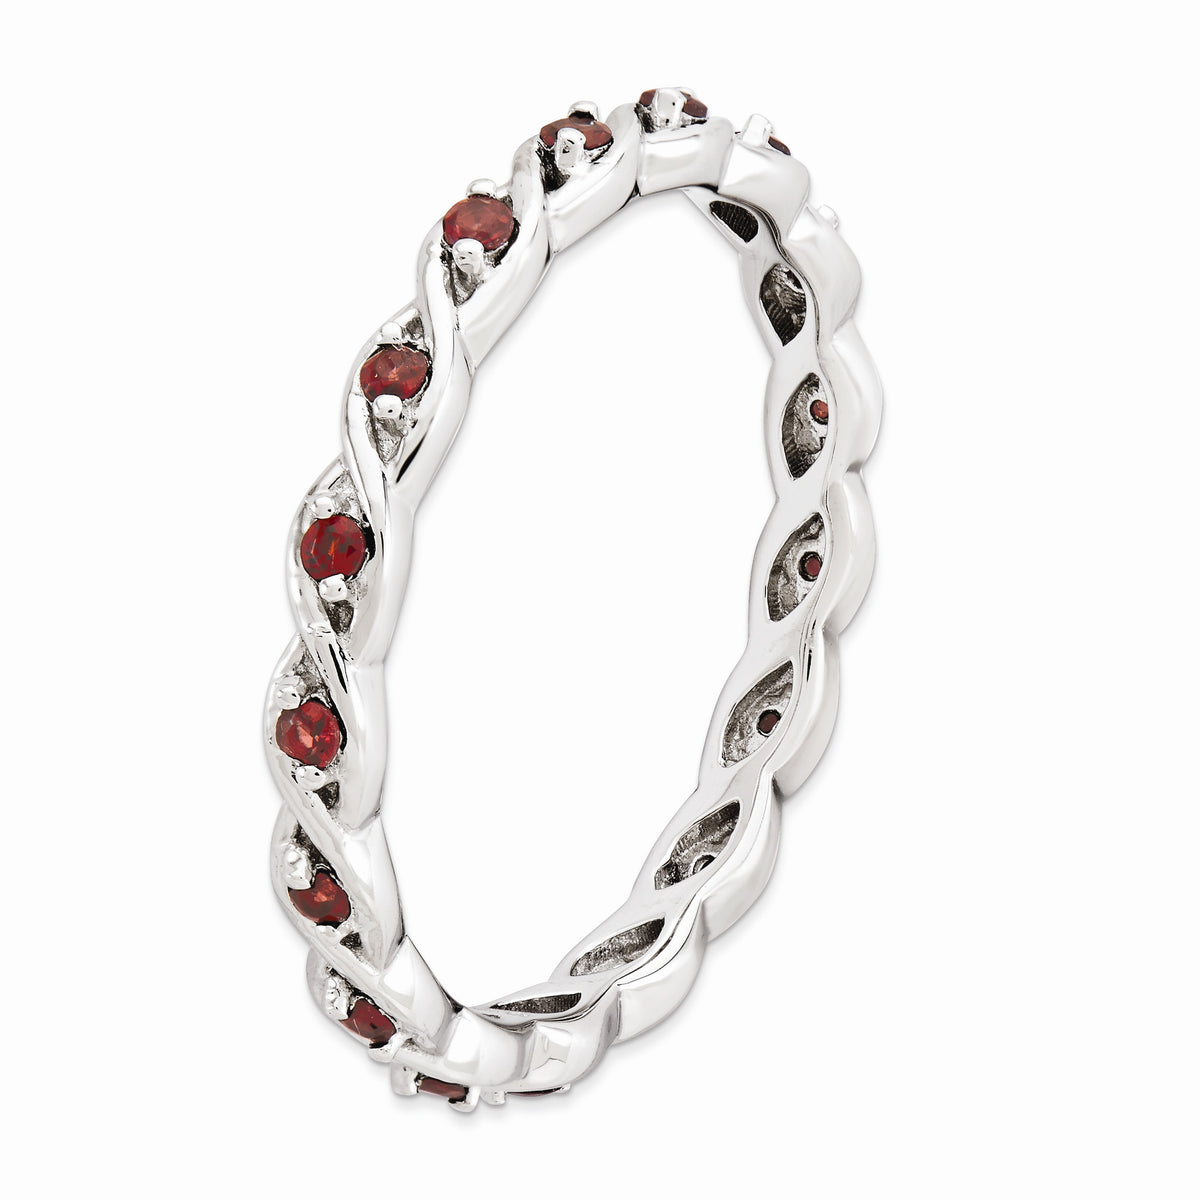 Alternate view of the 2.5mm Rhodium Plated Sterling Silver Stackable Garnet Twist Band by The Black Bow Jewelry Co.